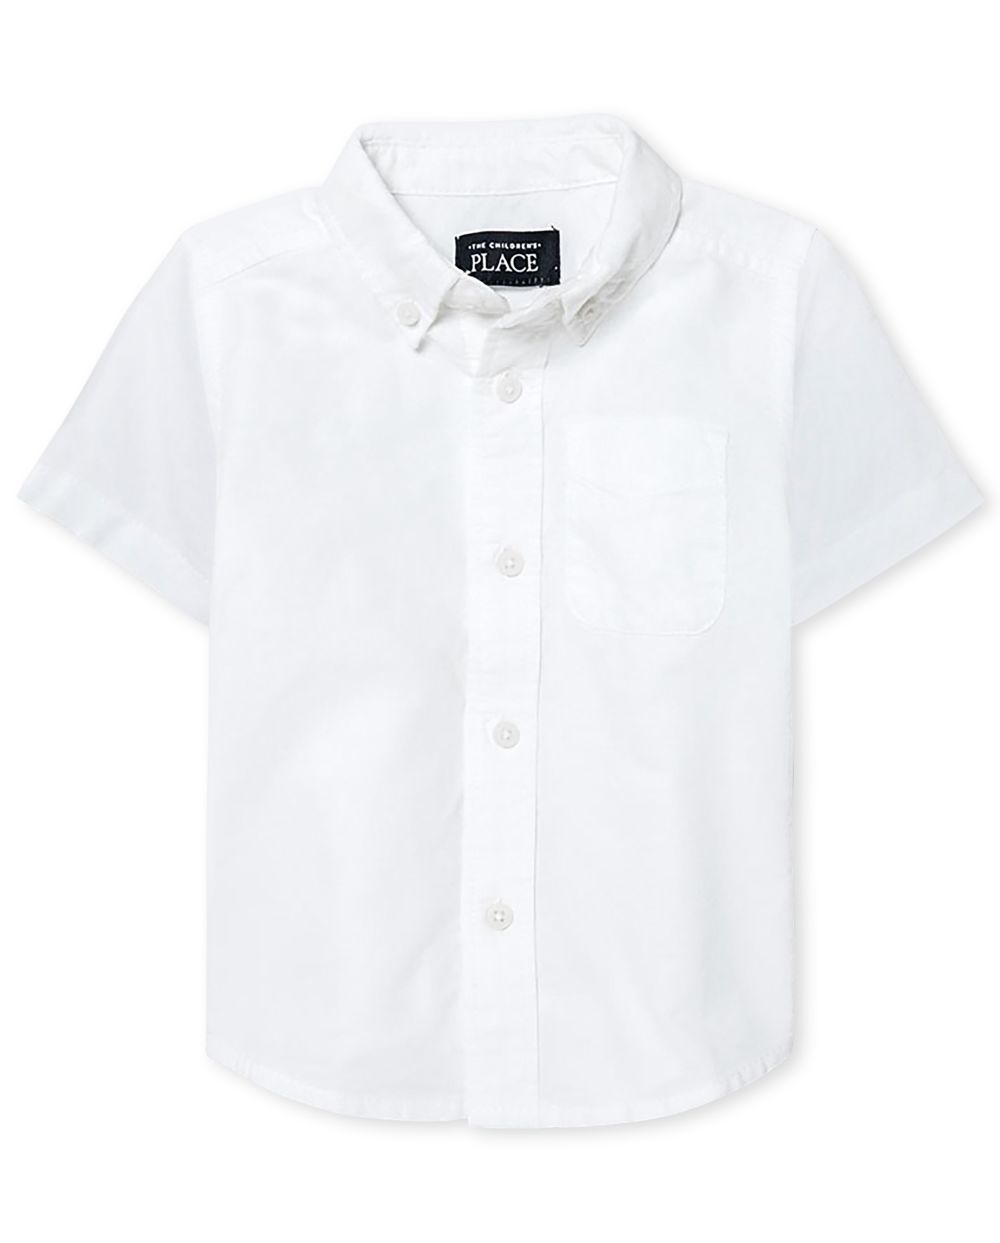 Baby And Toddler Boys Uniform Short Sleeve Oxford Button Down Shirt